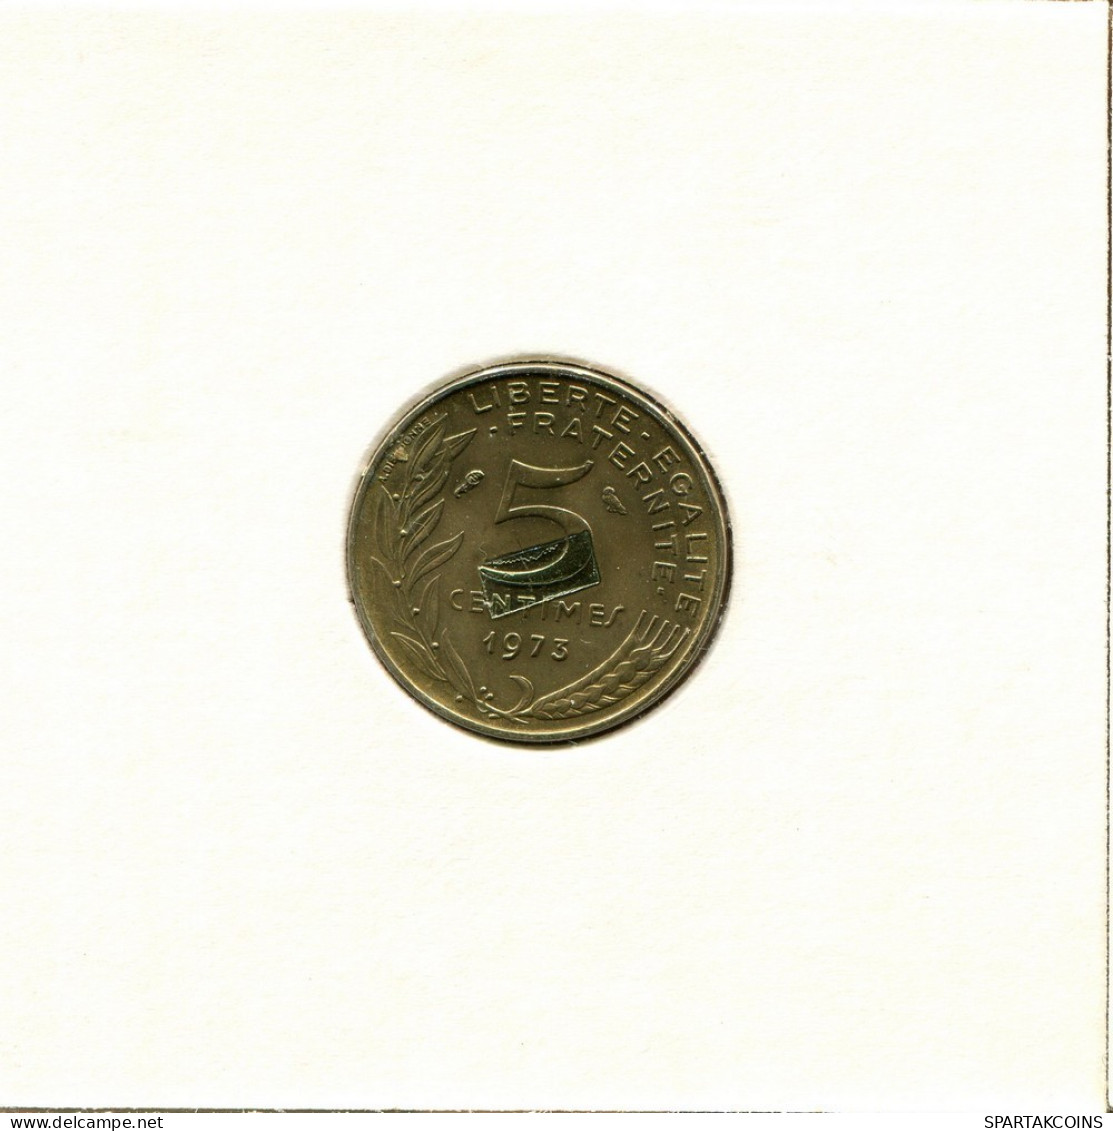 5 CENTIMES 1973 FRANCE Coin #BB414.U.A - 5 Centimes